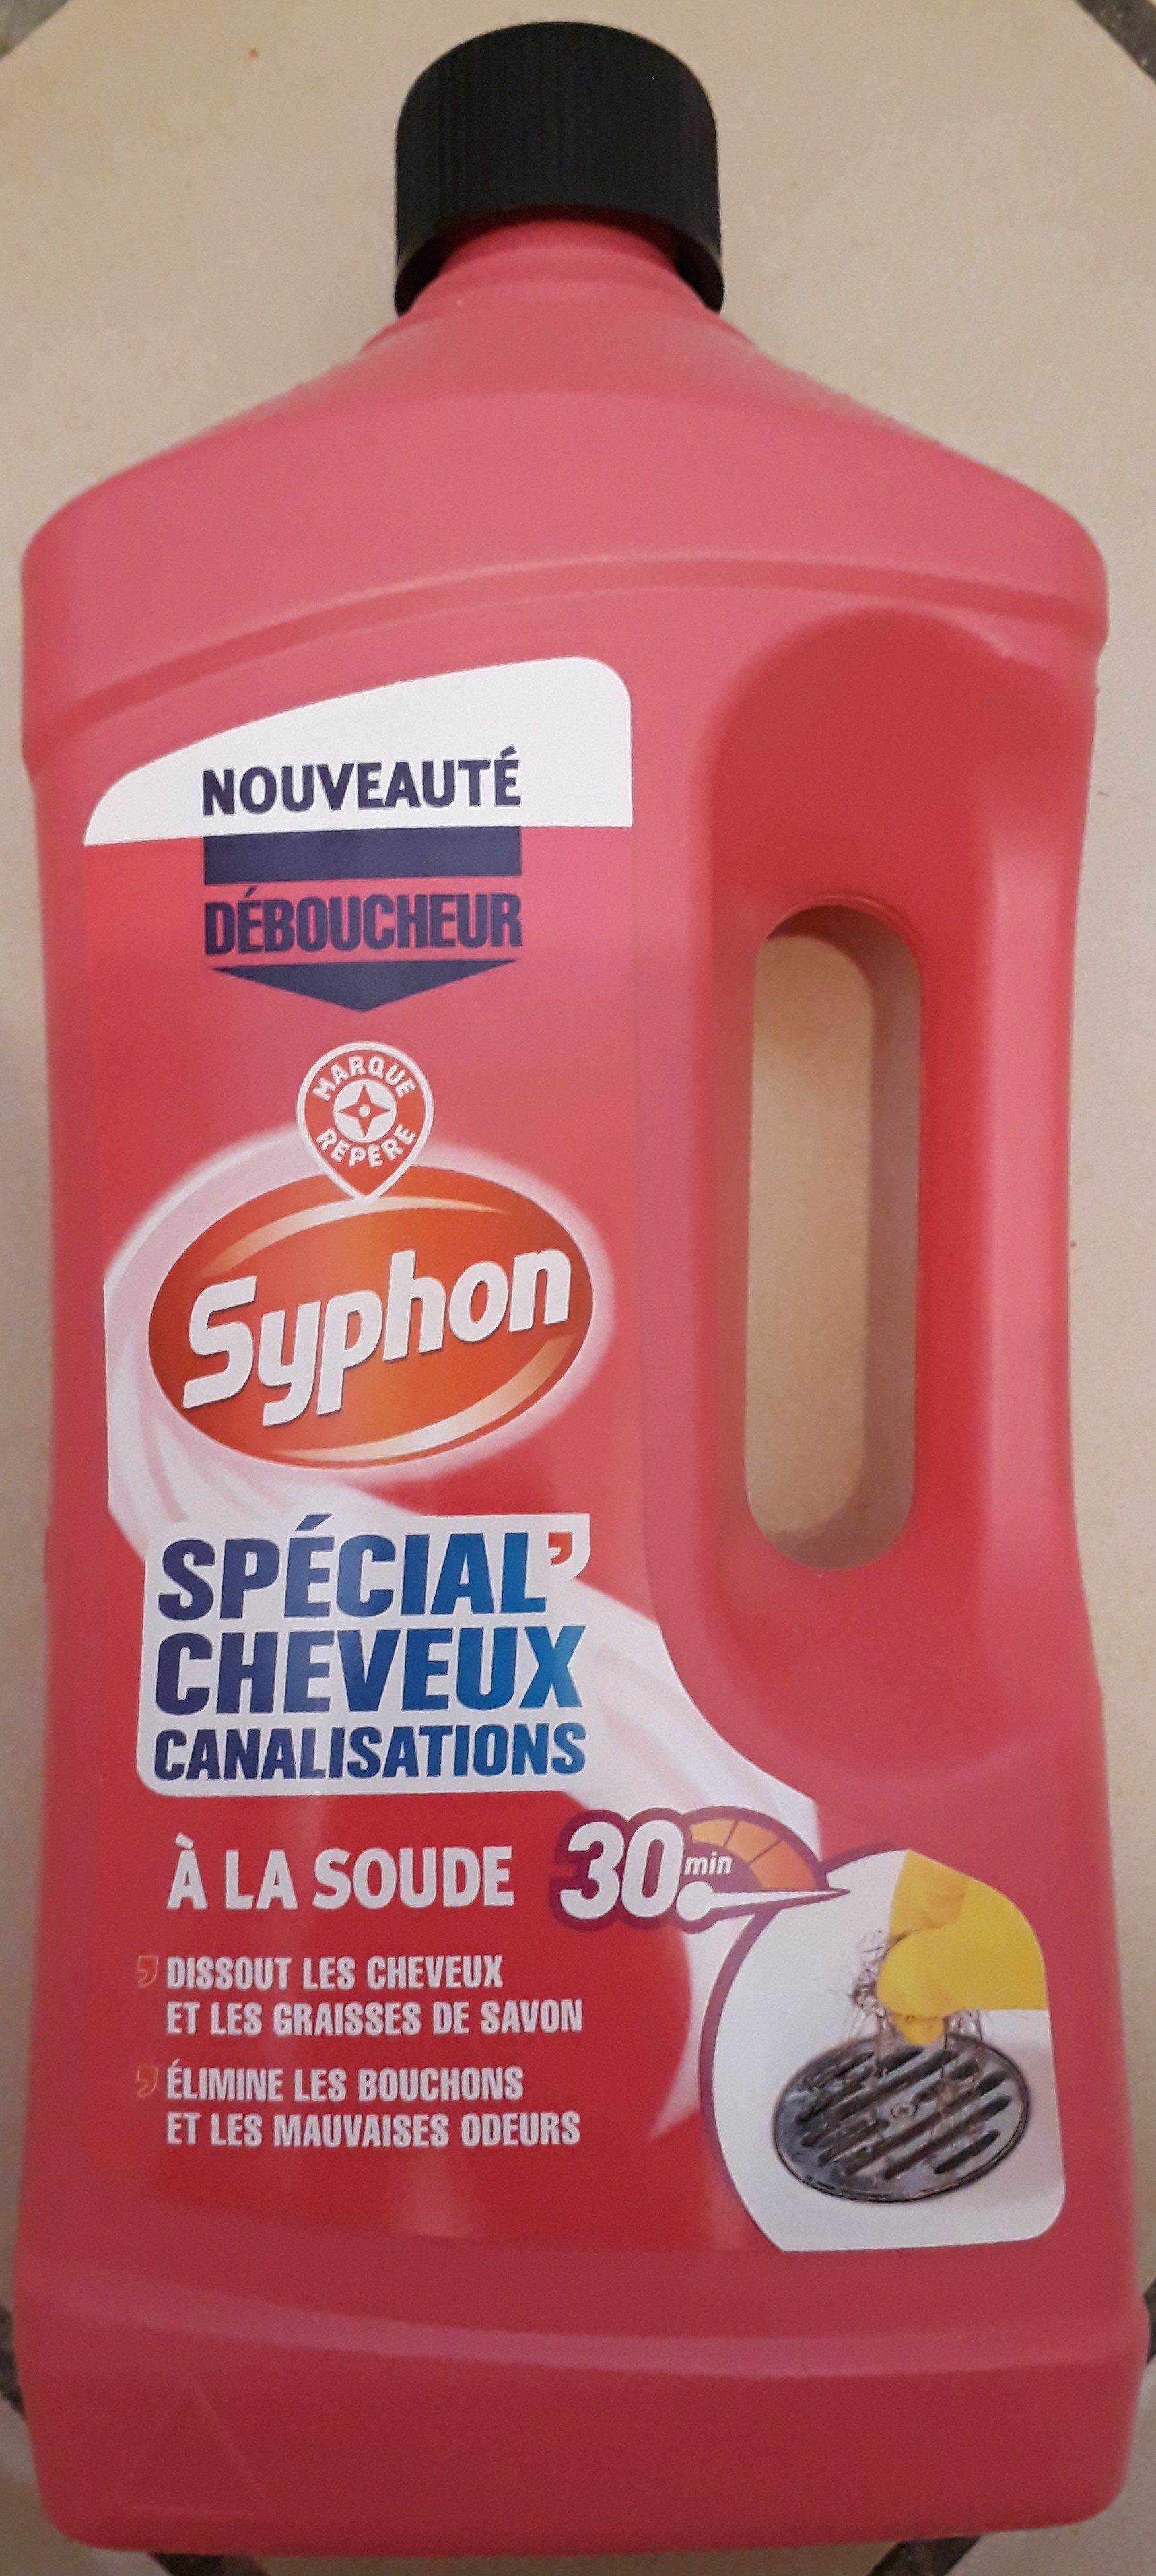 Syphon spécial' cheveux canalisations - Product - fr